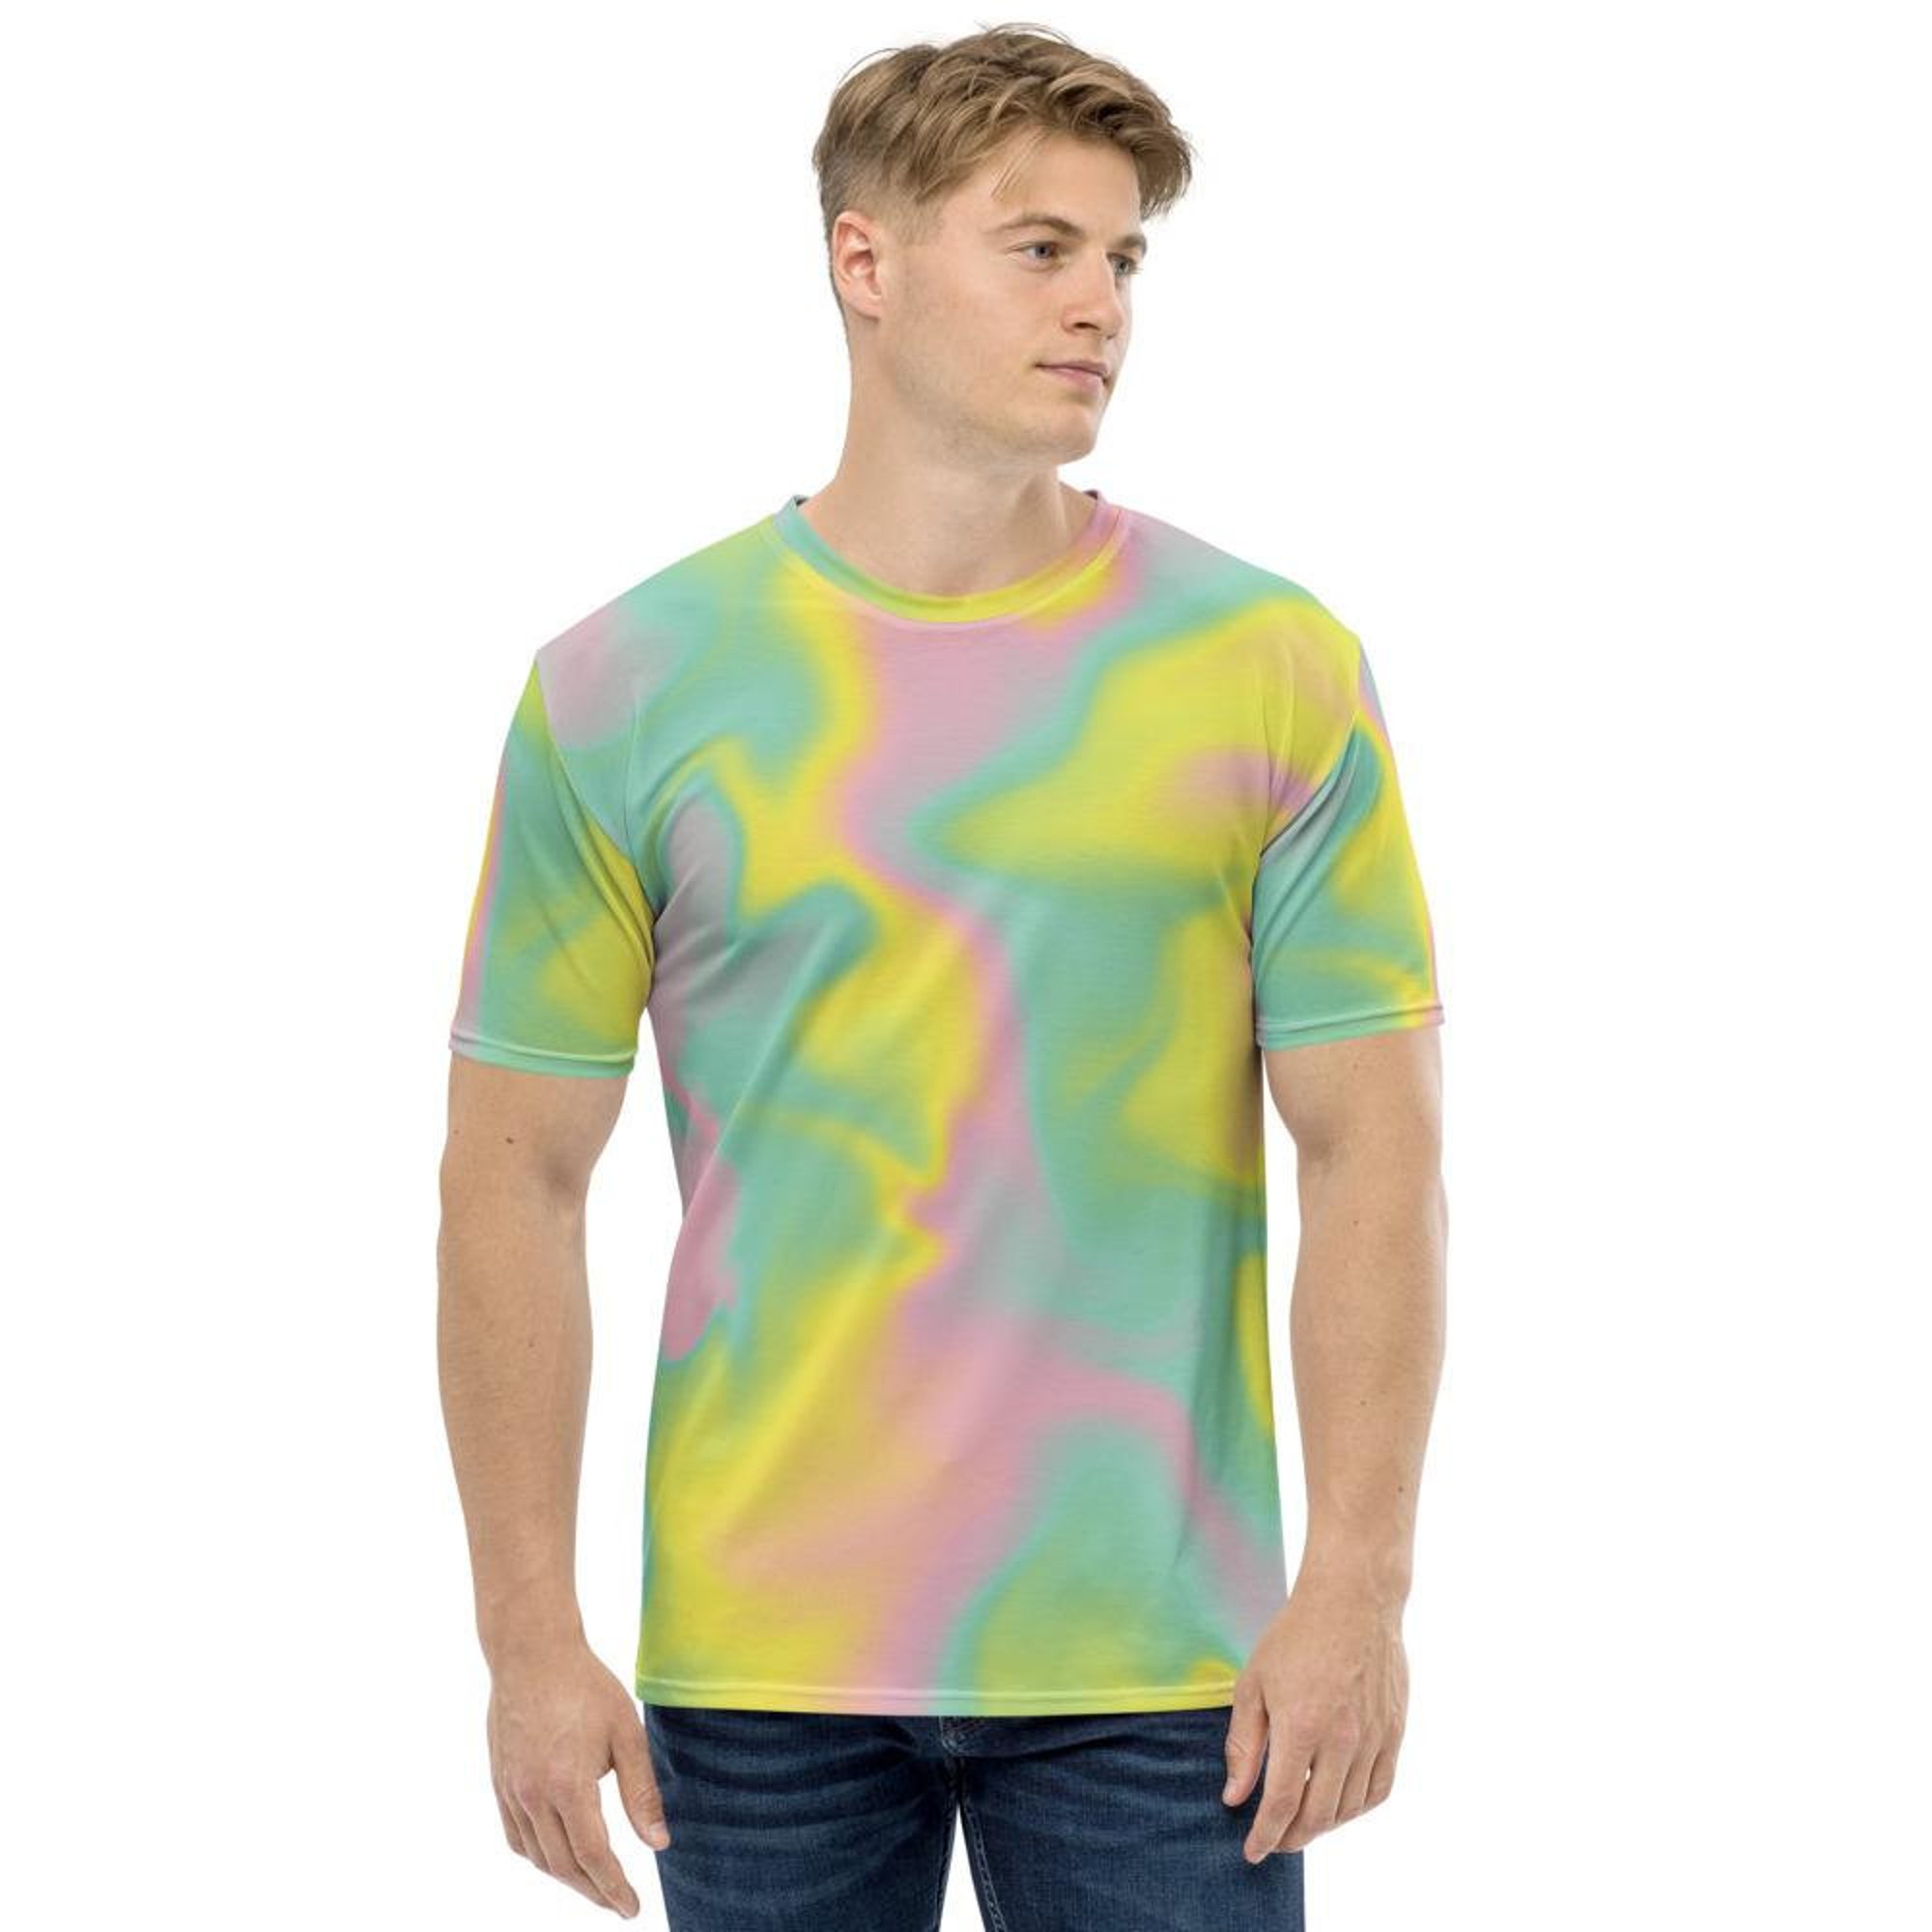 Discover Pink Mint Green Yellow Tinge Hues Ombre Iridescence Holographic 3D T Shirt